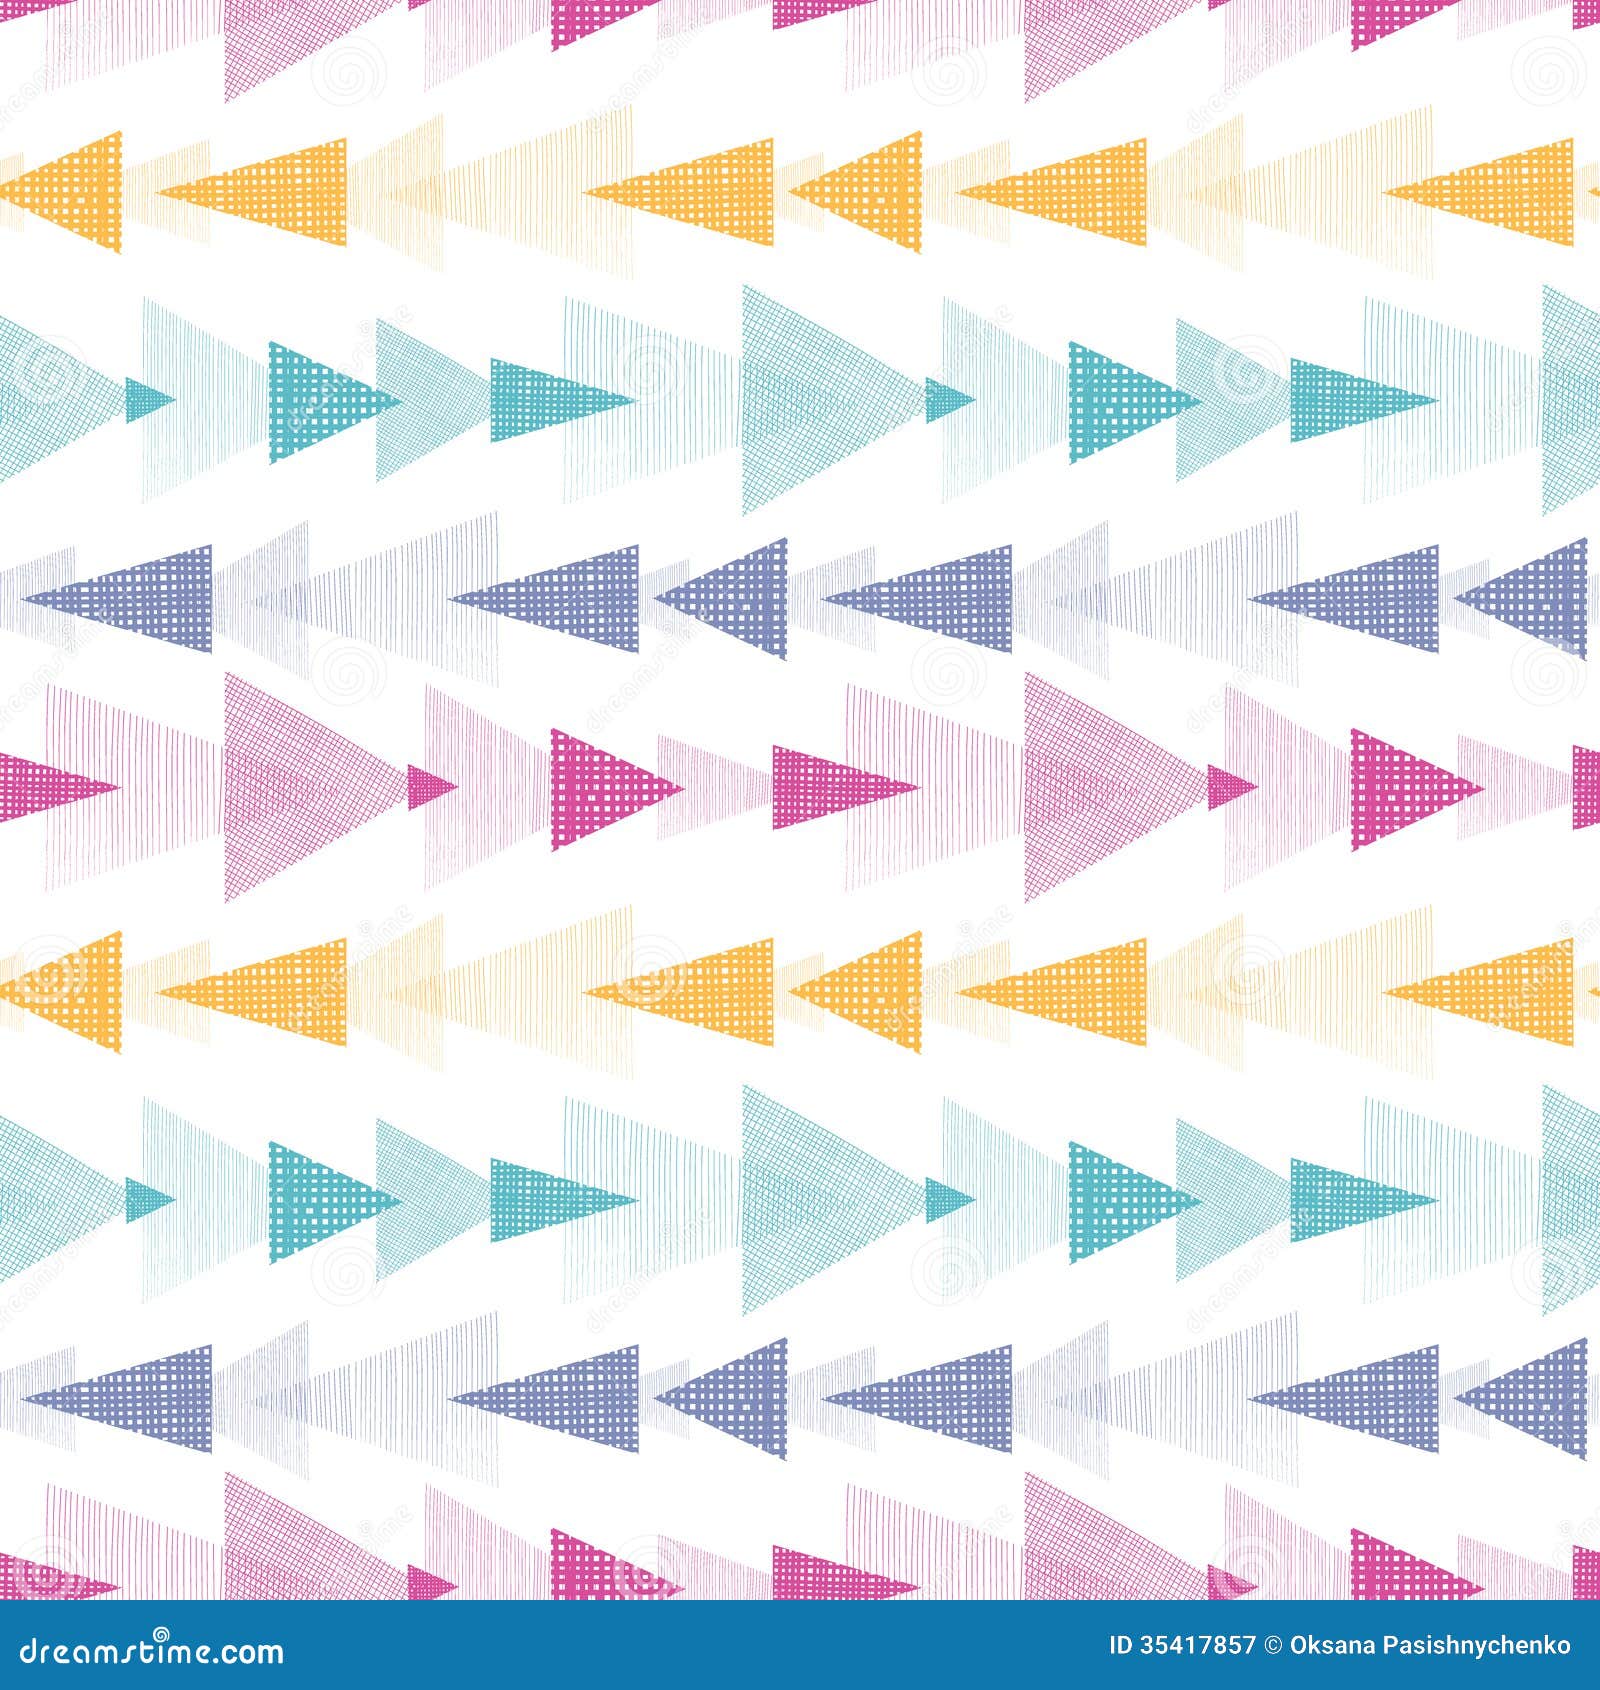 backgrounds tumblr tribal Royalty Textured Arrows Pattern Free Stripes Seamless